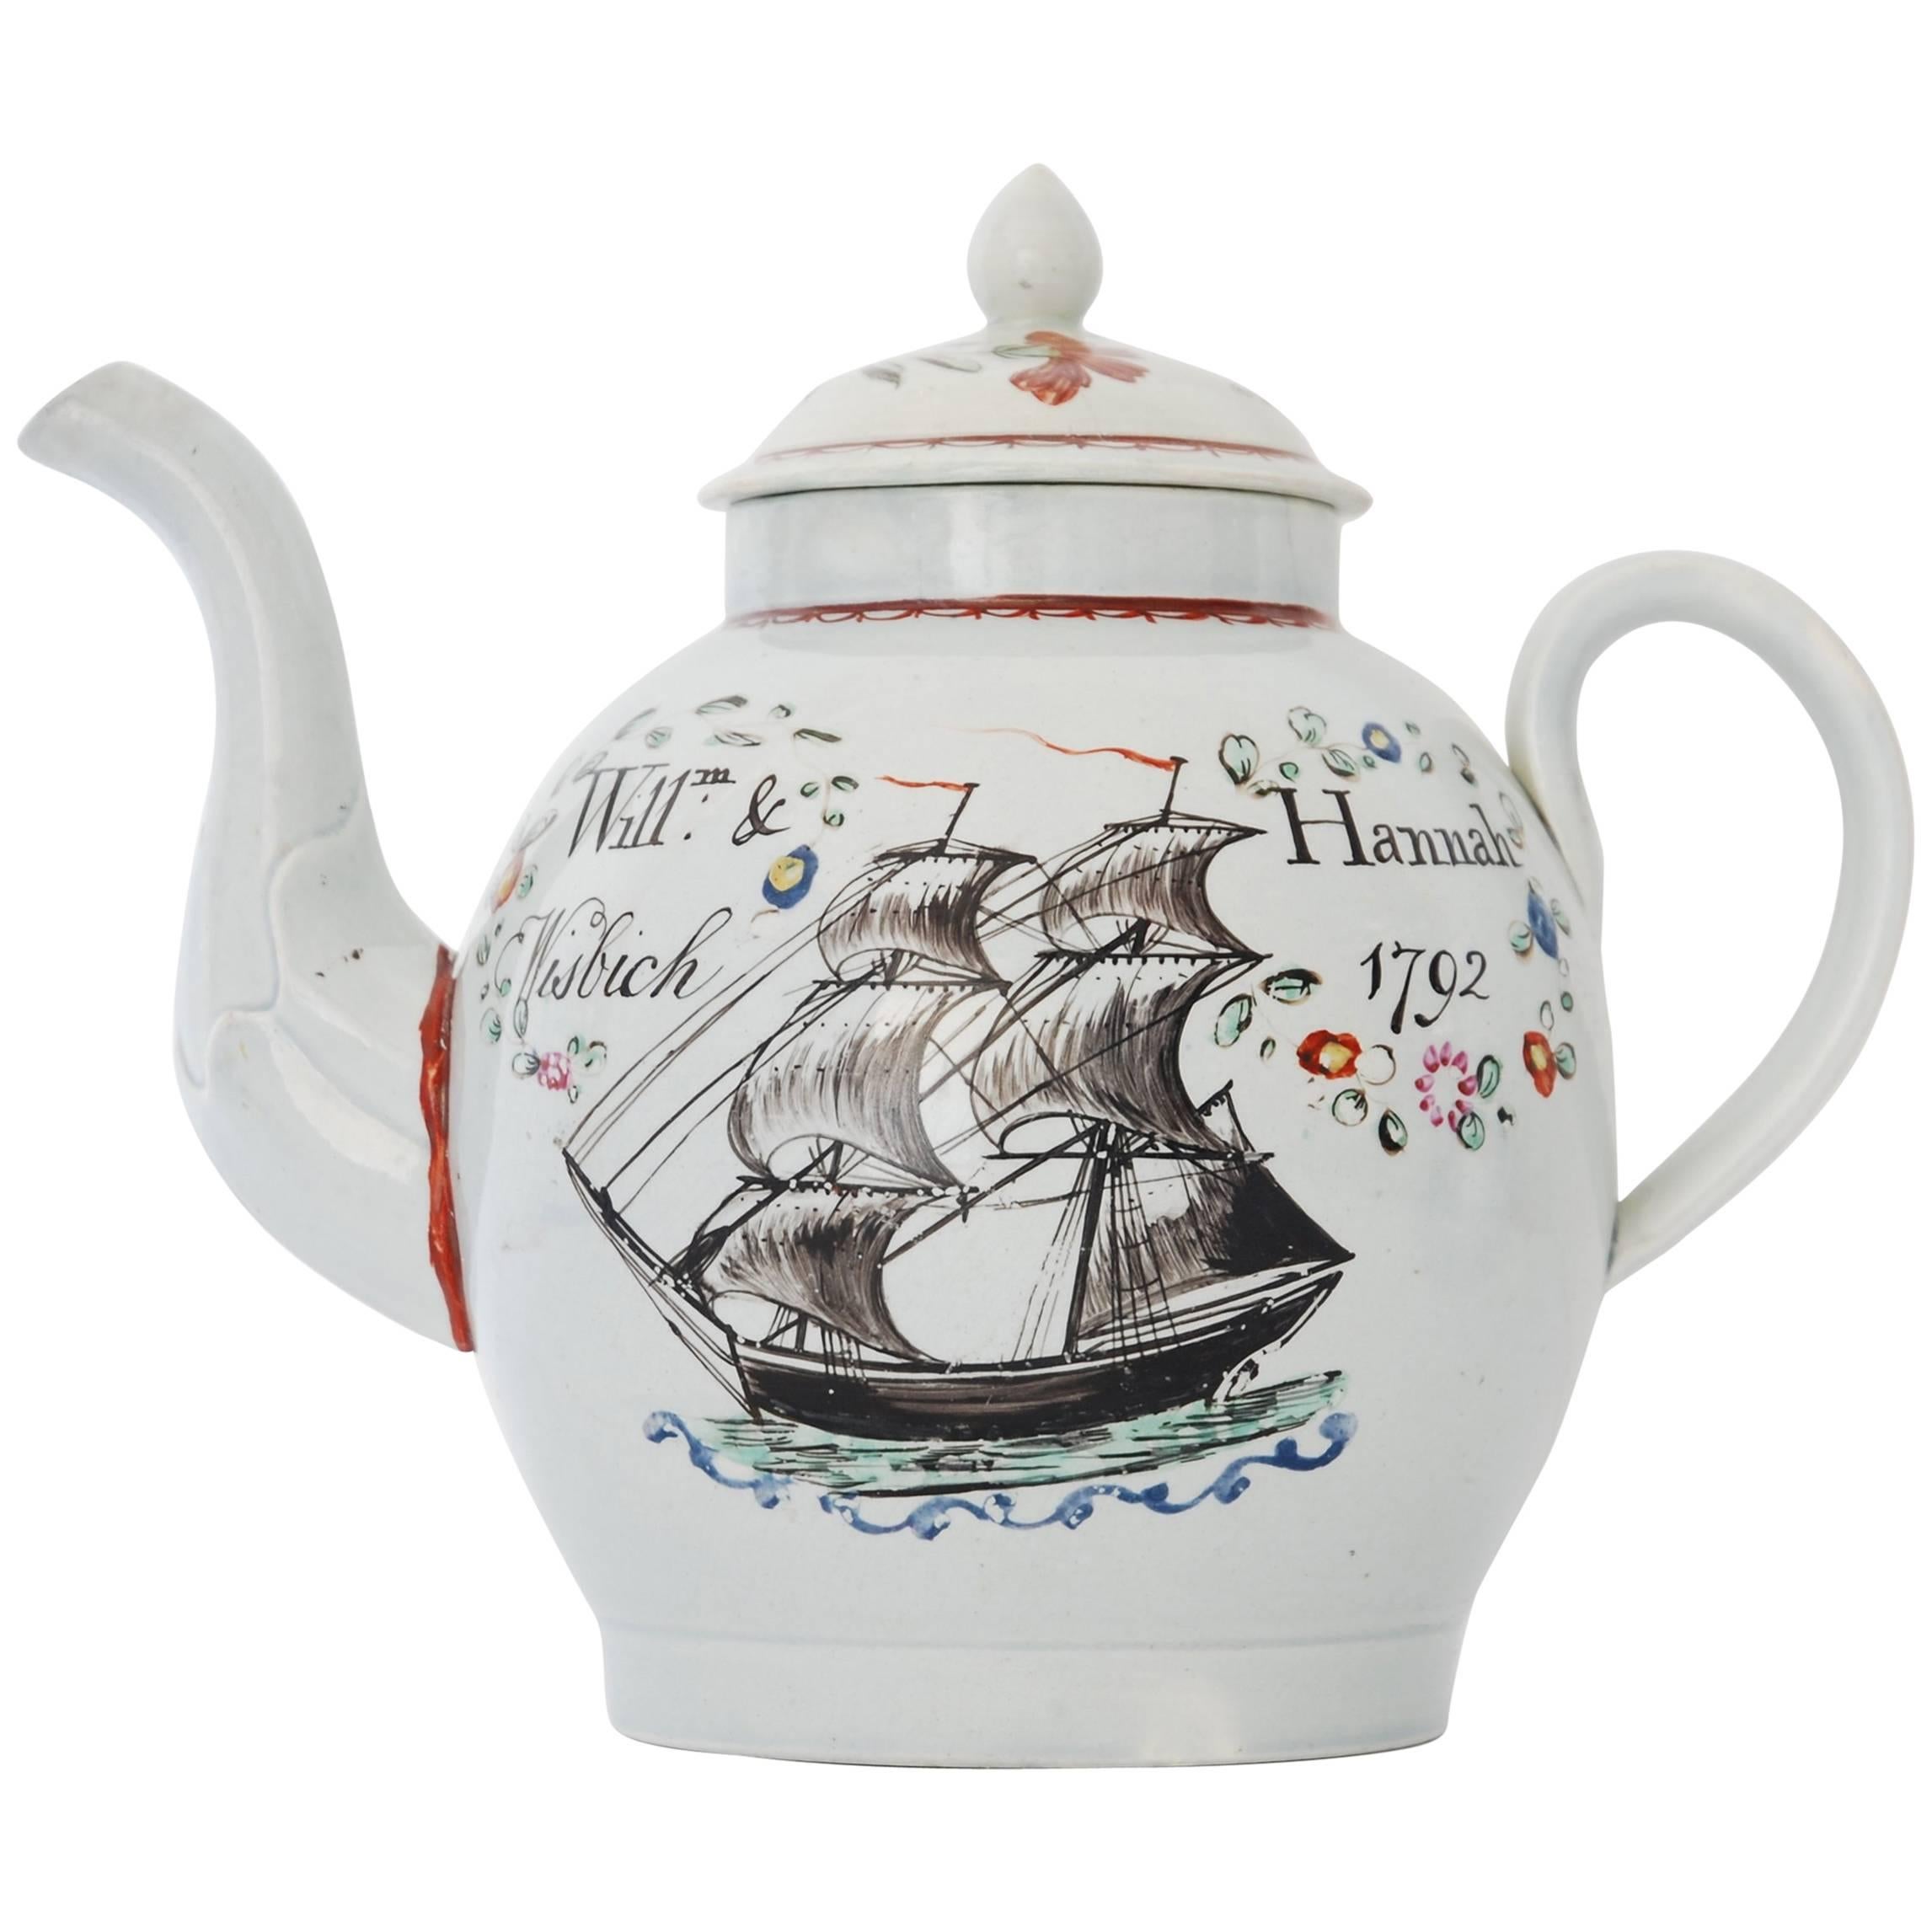 Dated Pearlware Teapot with Ship, English, 1792 For Sale